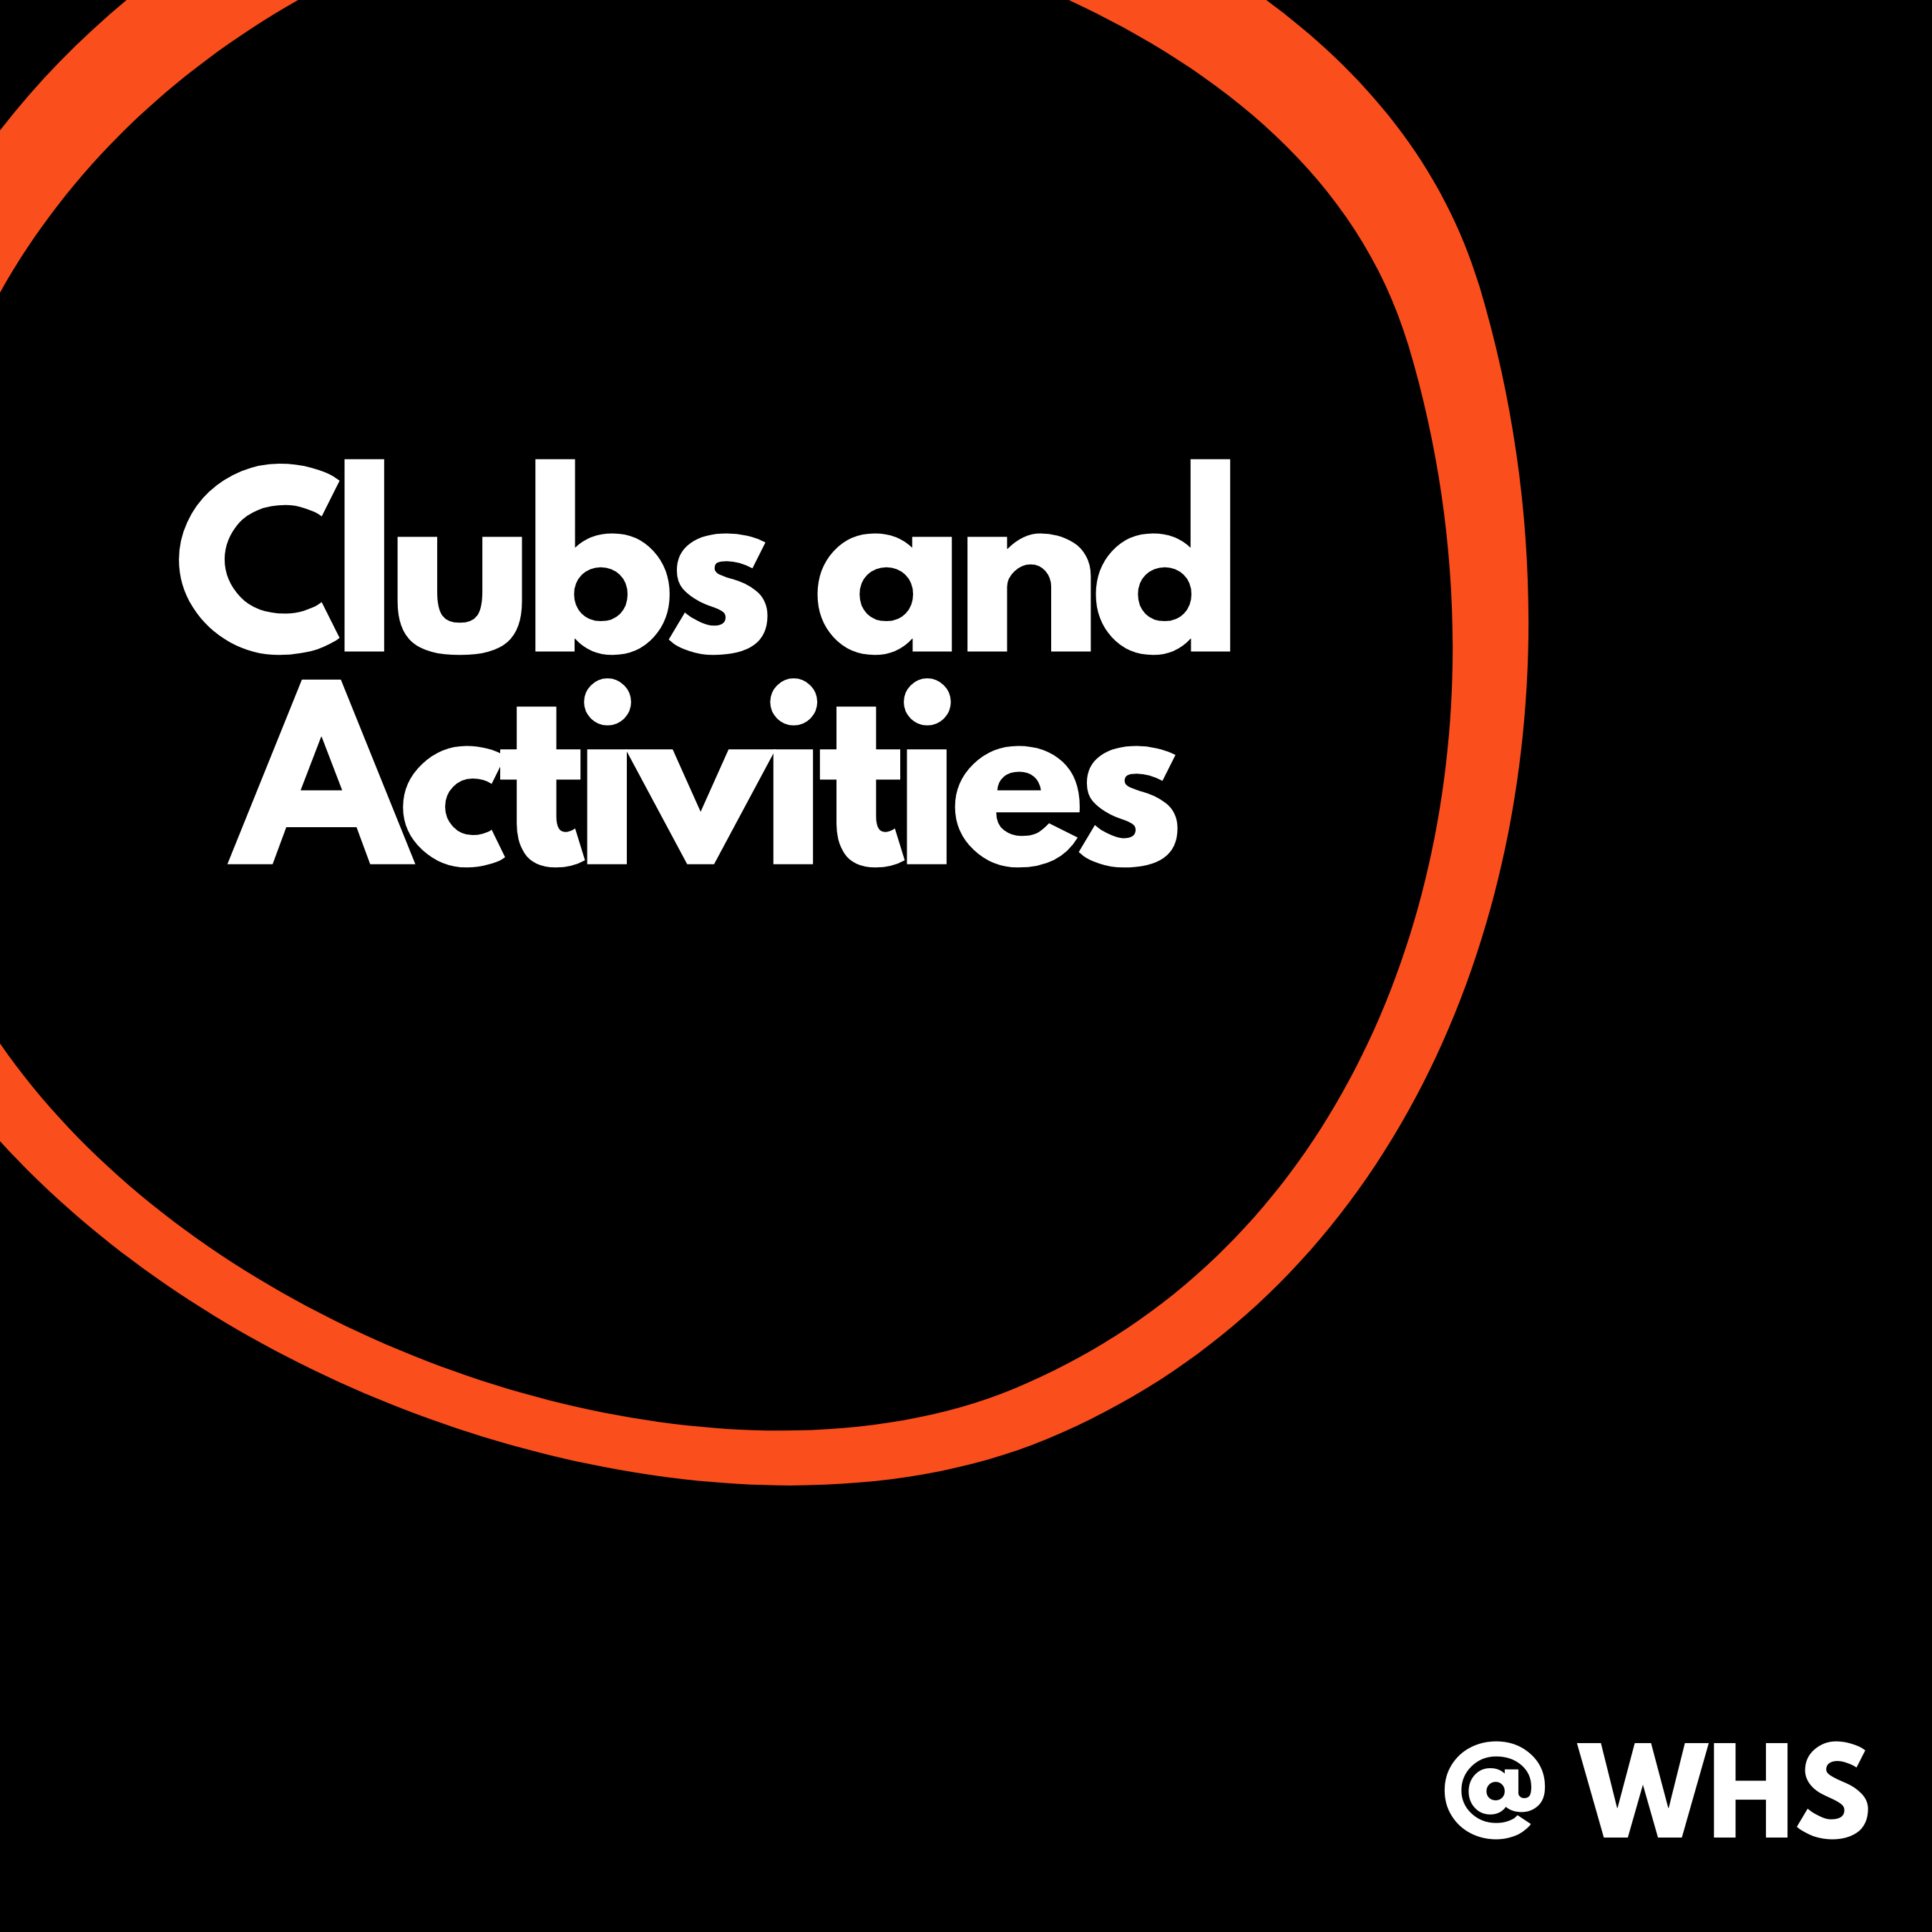 Clubs and activities graphic